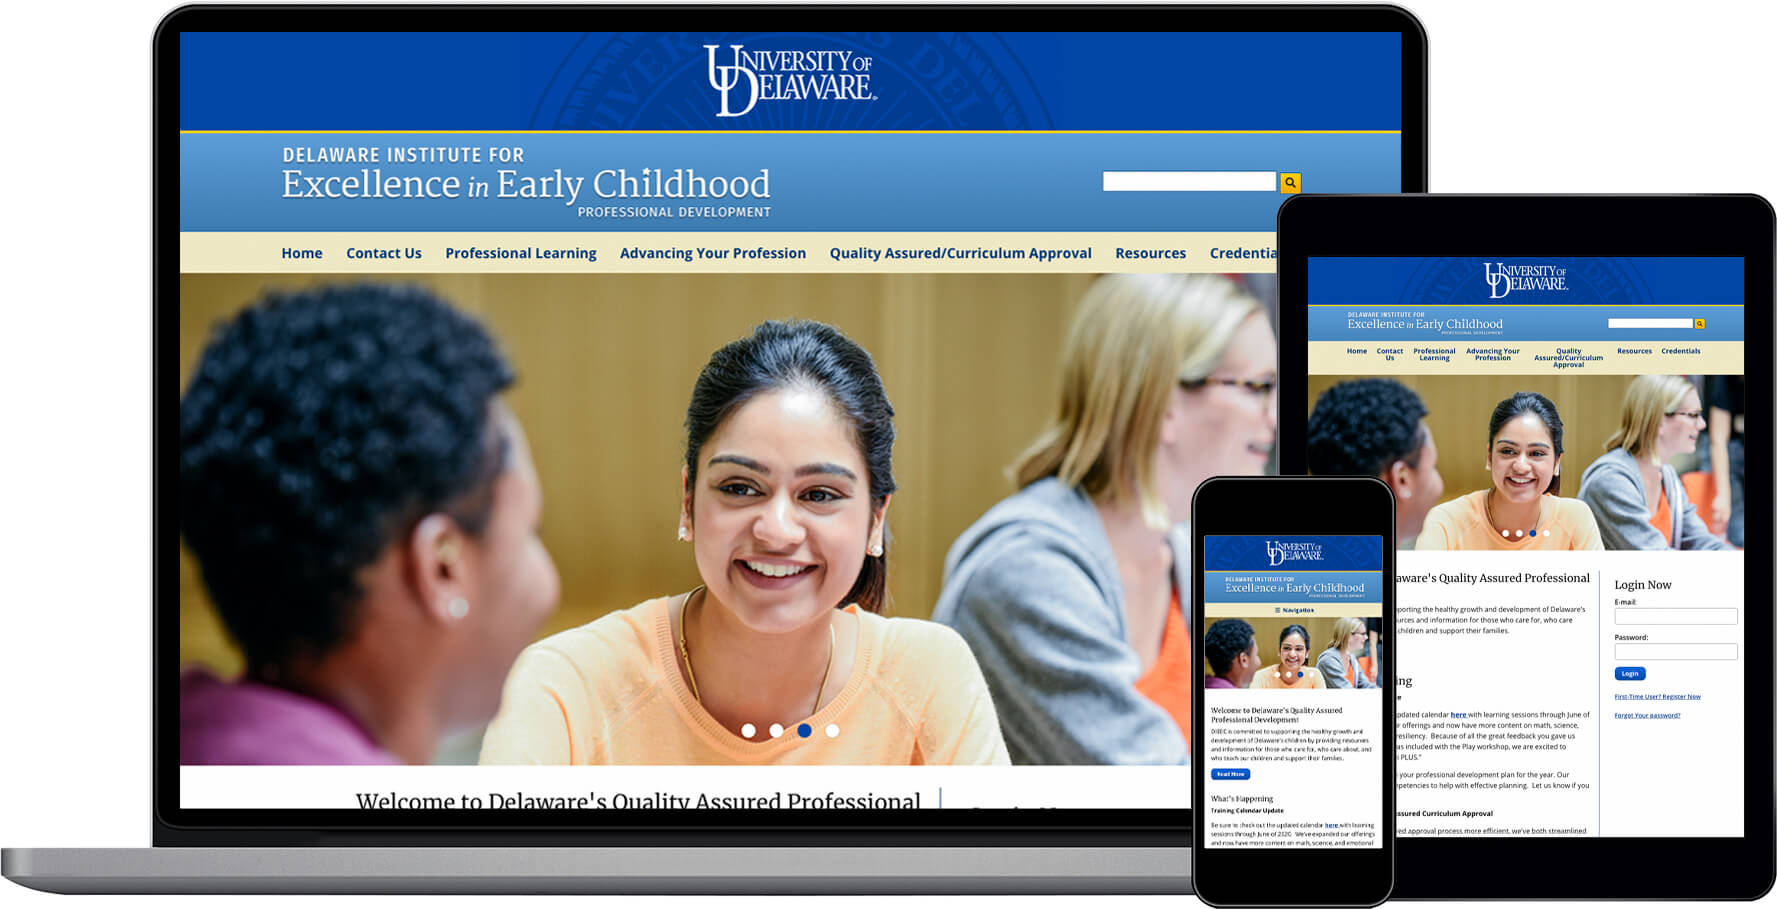 Delaware Institute for Excellence in Early Childhood Responsive Website Design